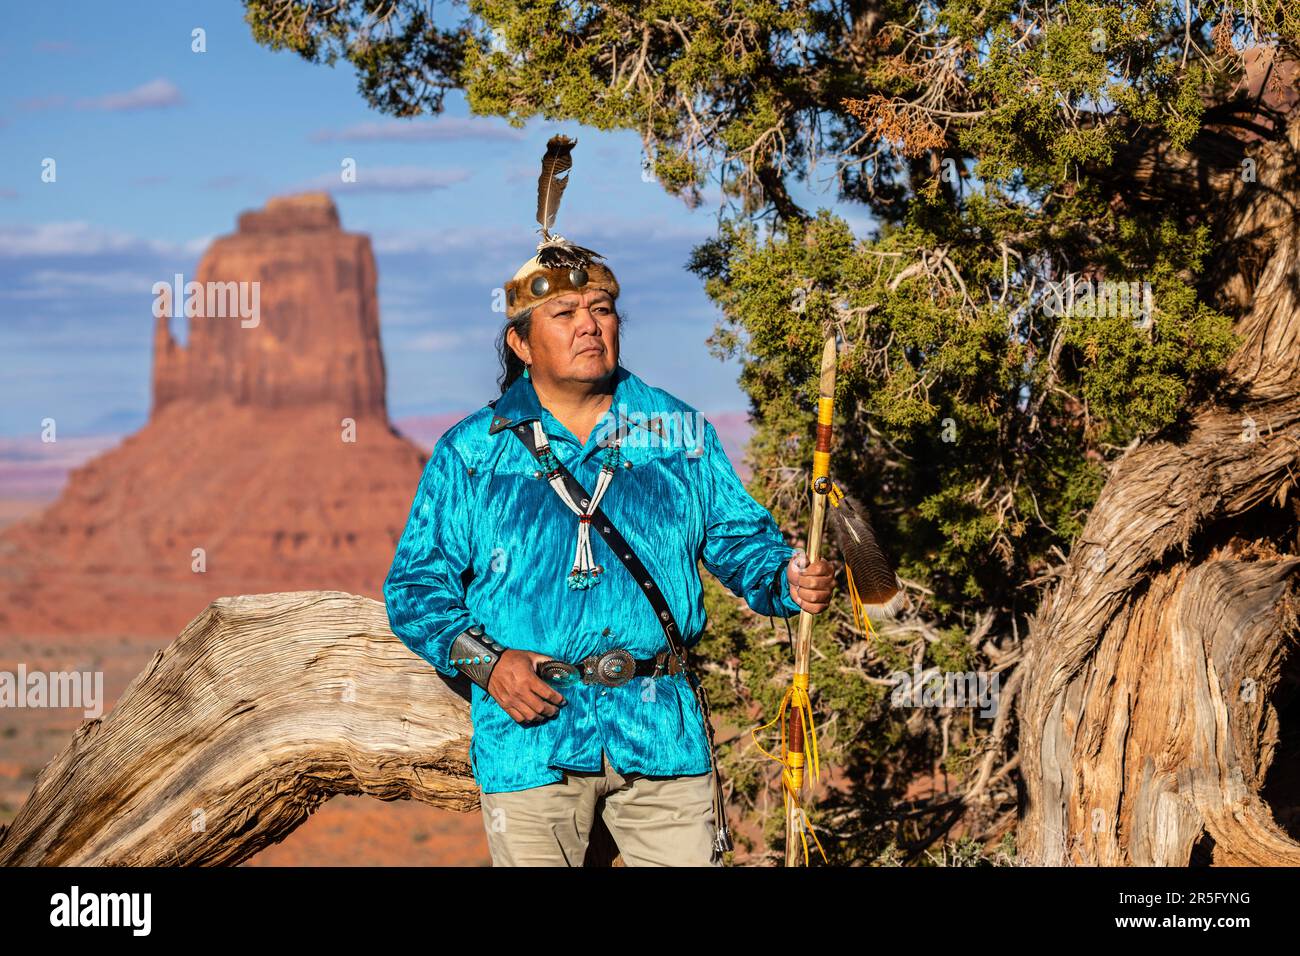 American Indian Navajo warrior with spear at Monument Valley Navajo Tribal Park, Arizona, United States Stock Photo